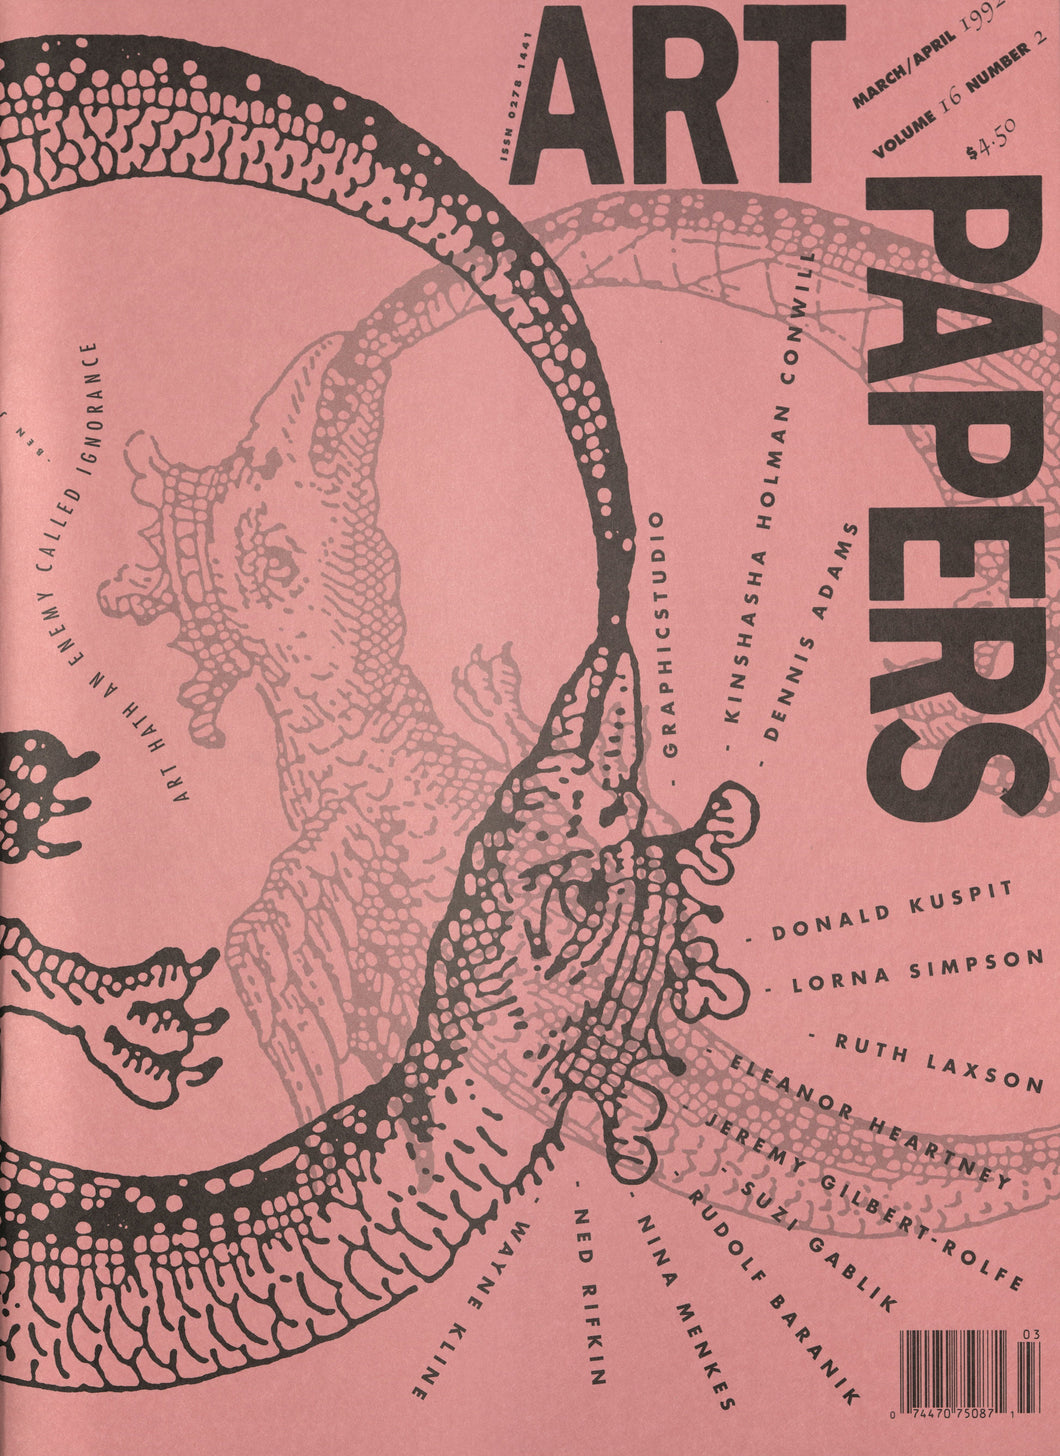 ART PAPERS 16.02 - Mar/Apr 1992 - SOLD OUT